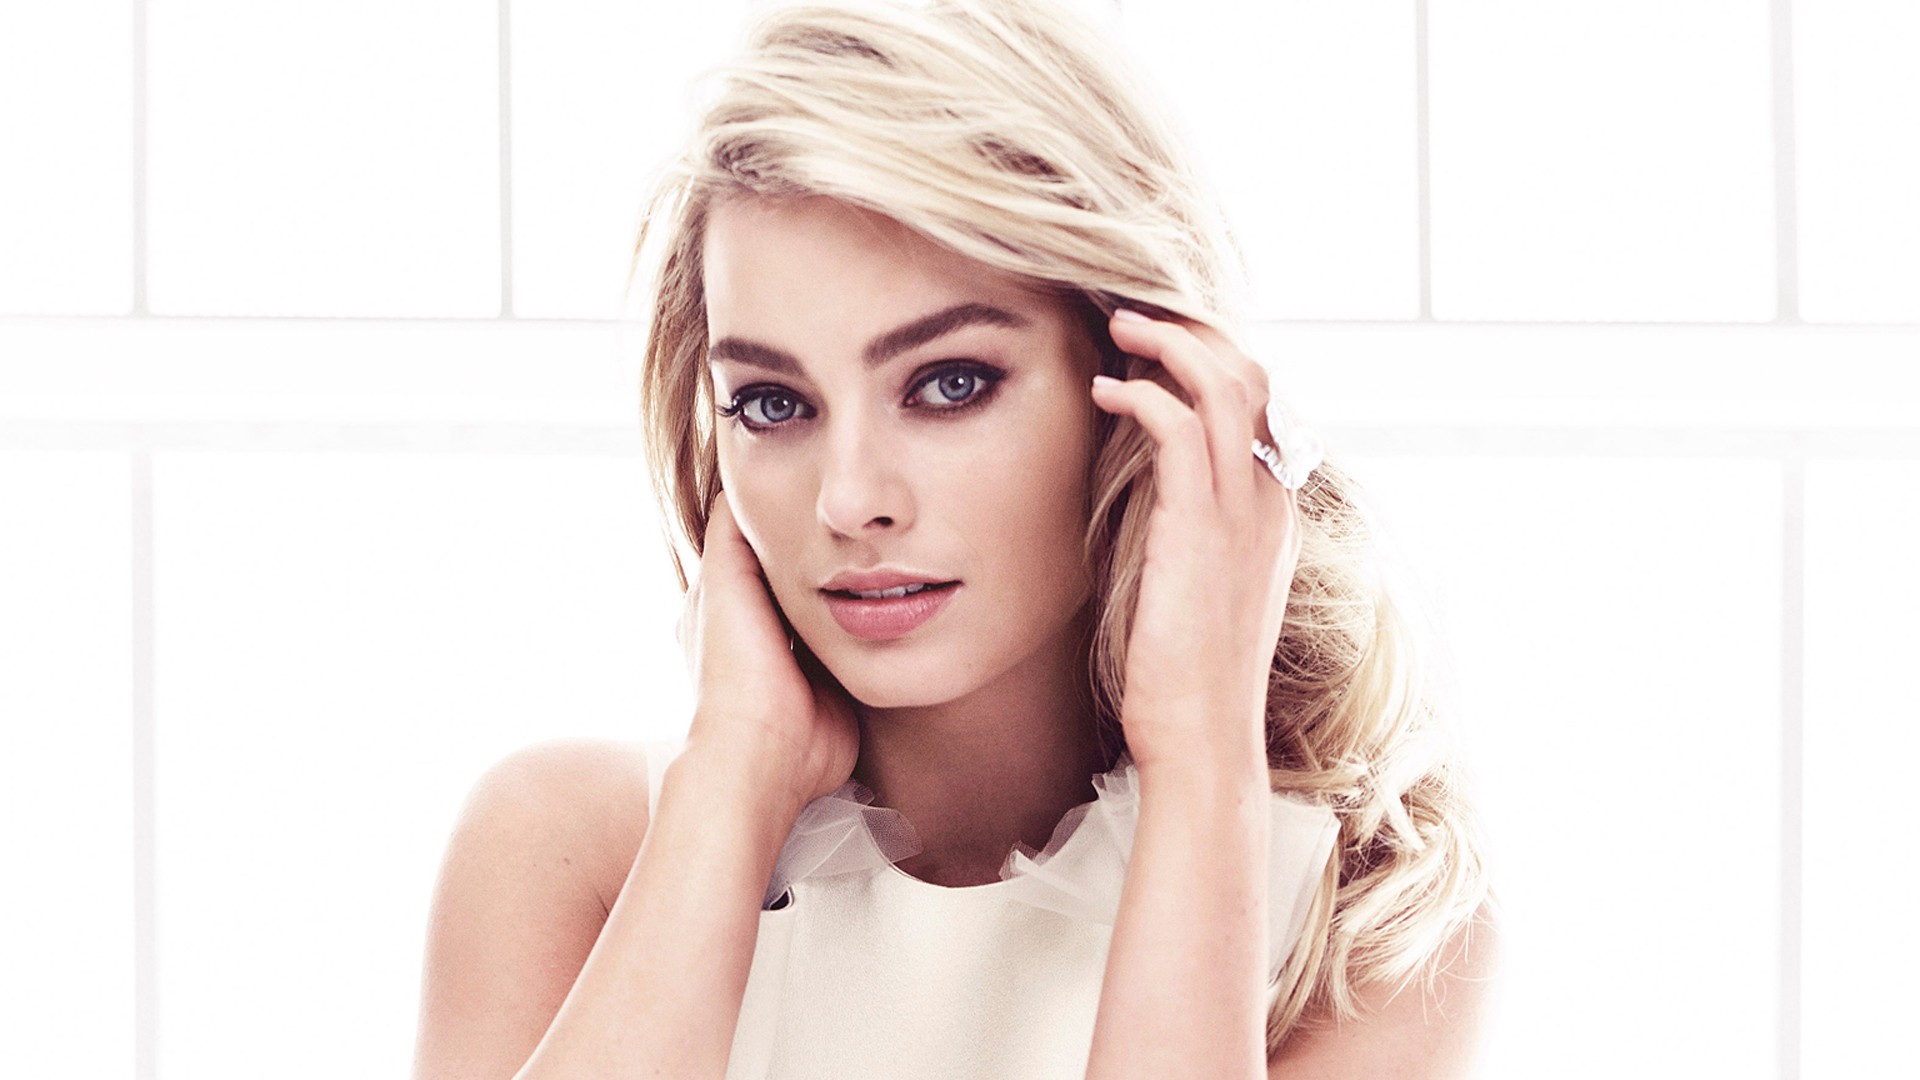 Margot Robbie wallpaper ·① Download free wallpapers for